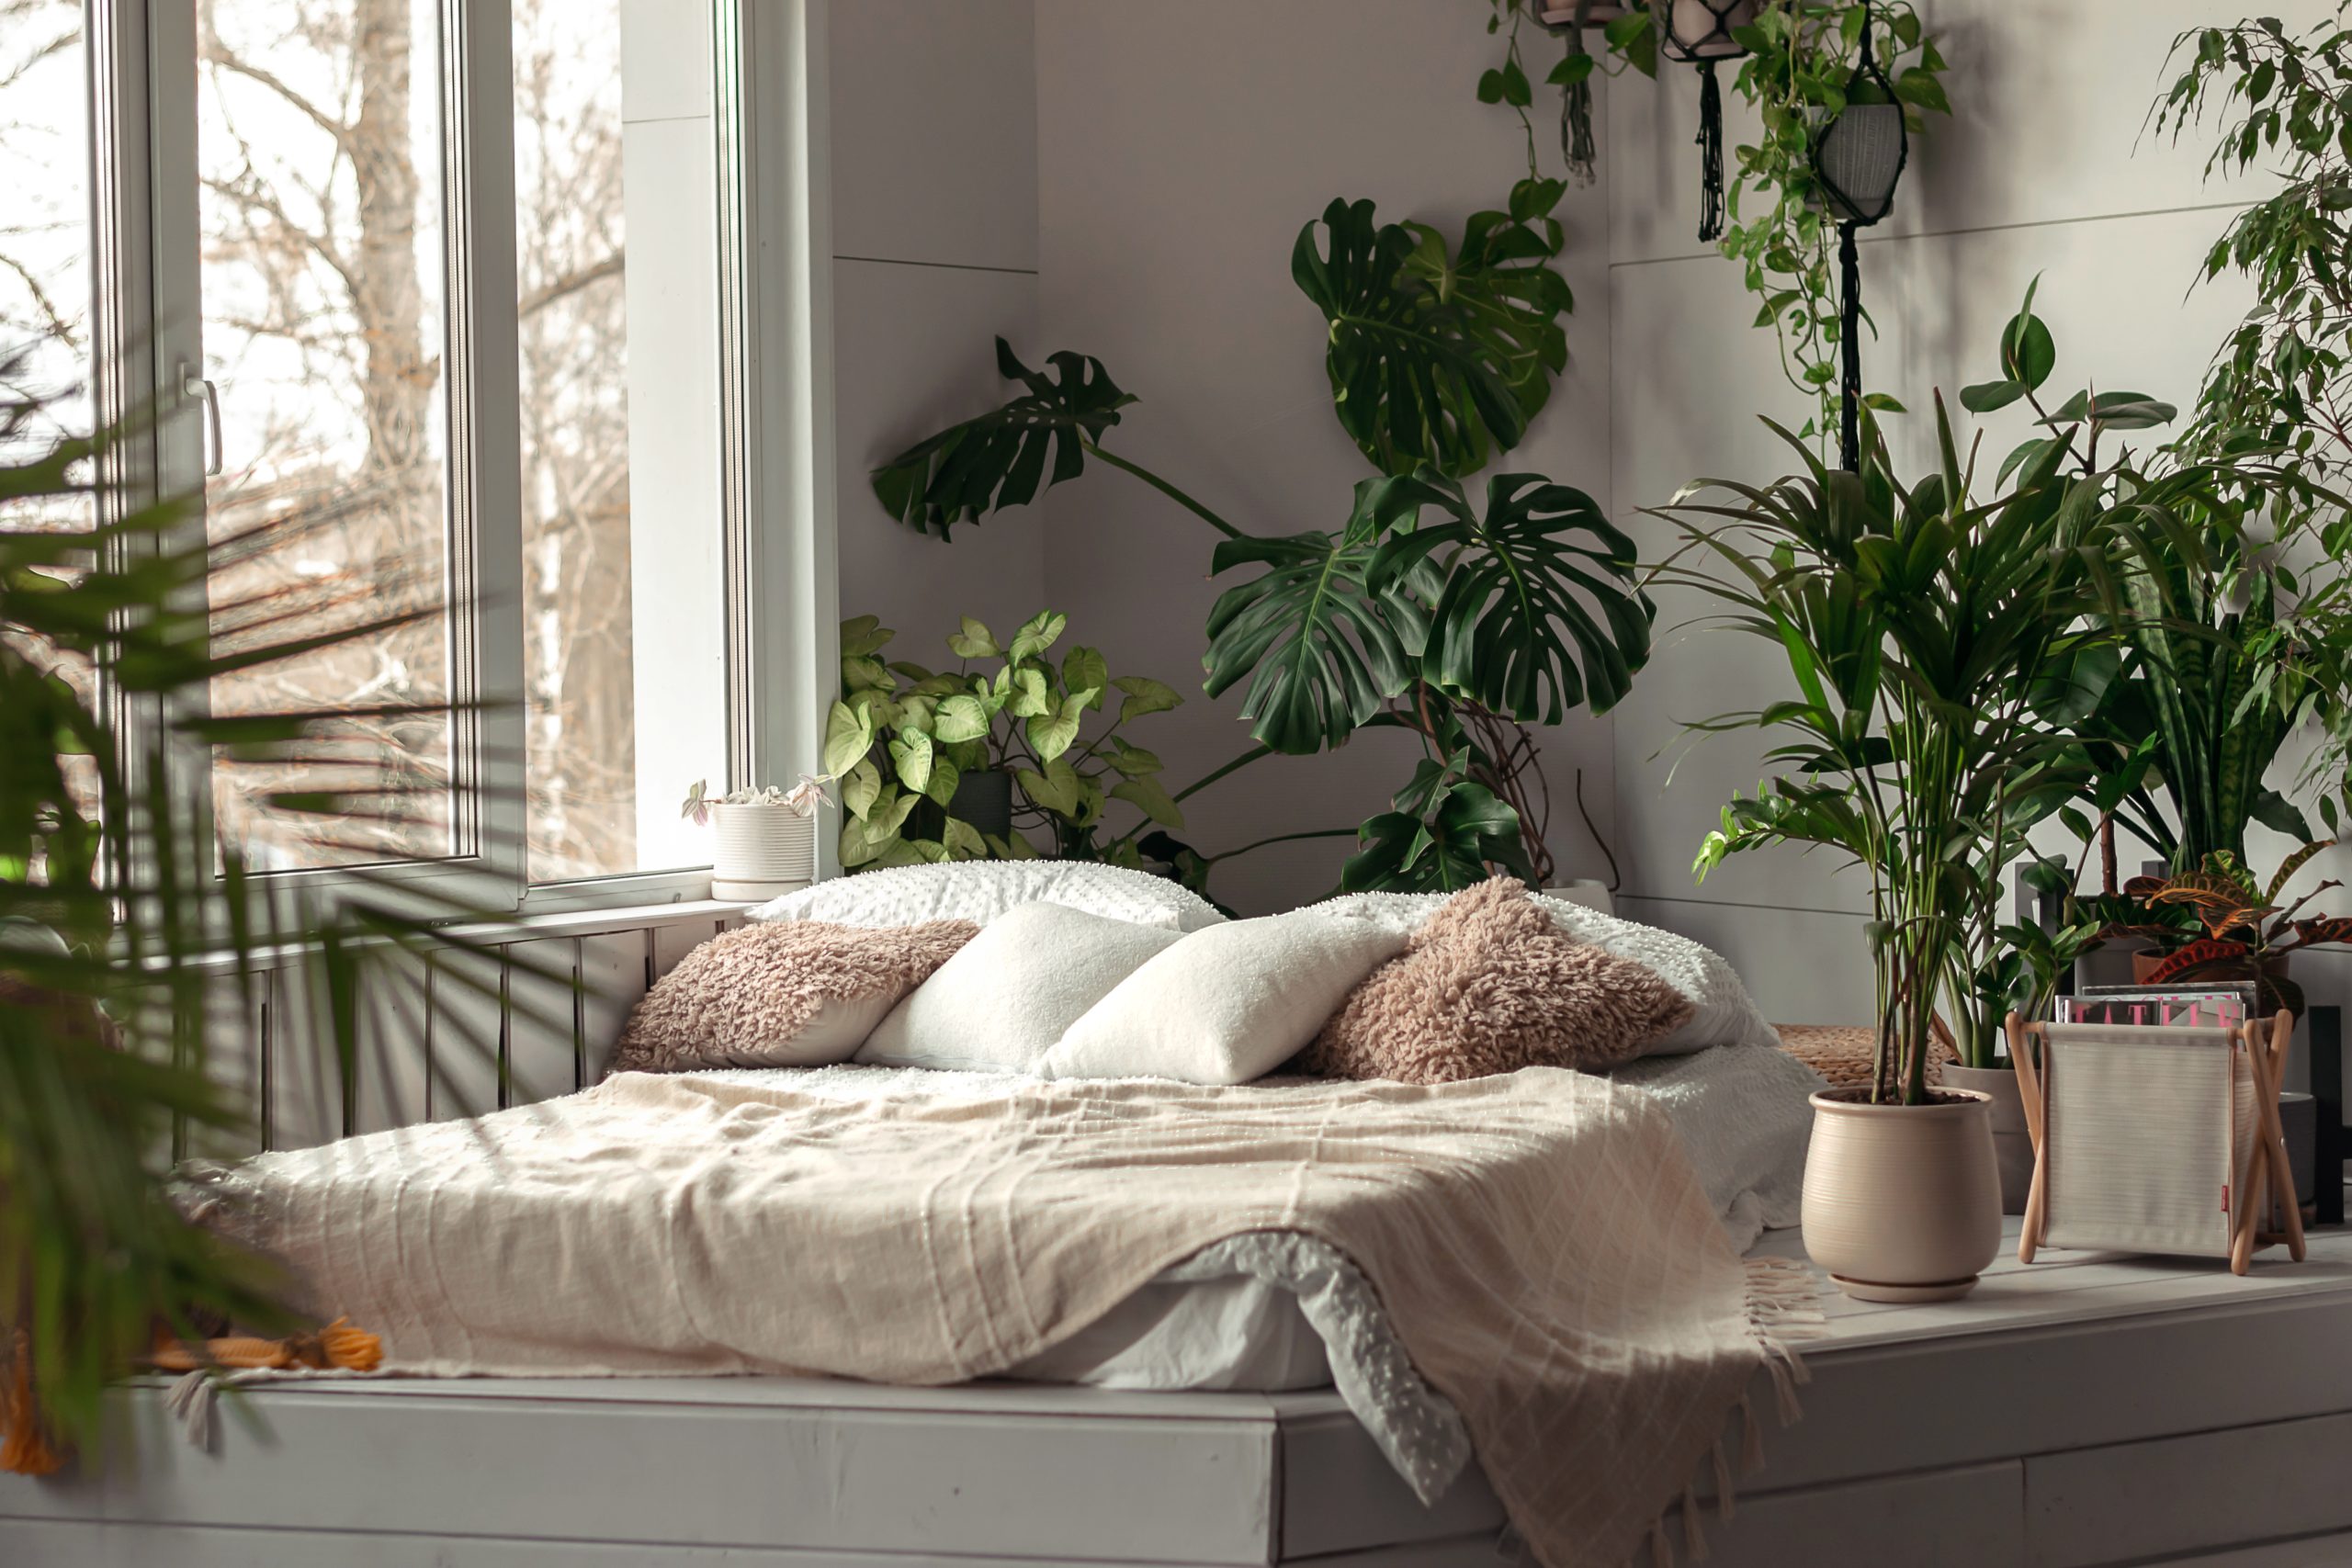 The interior of a bright bedroom with indoor plants ©buzmakovatatyana